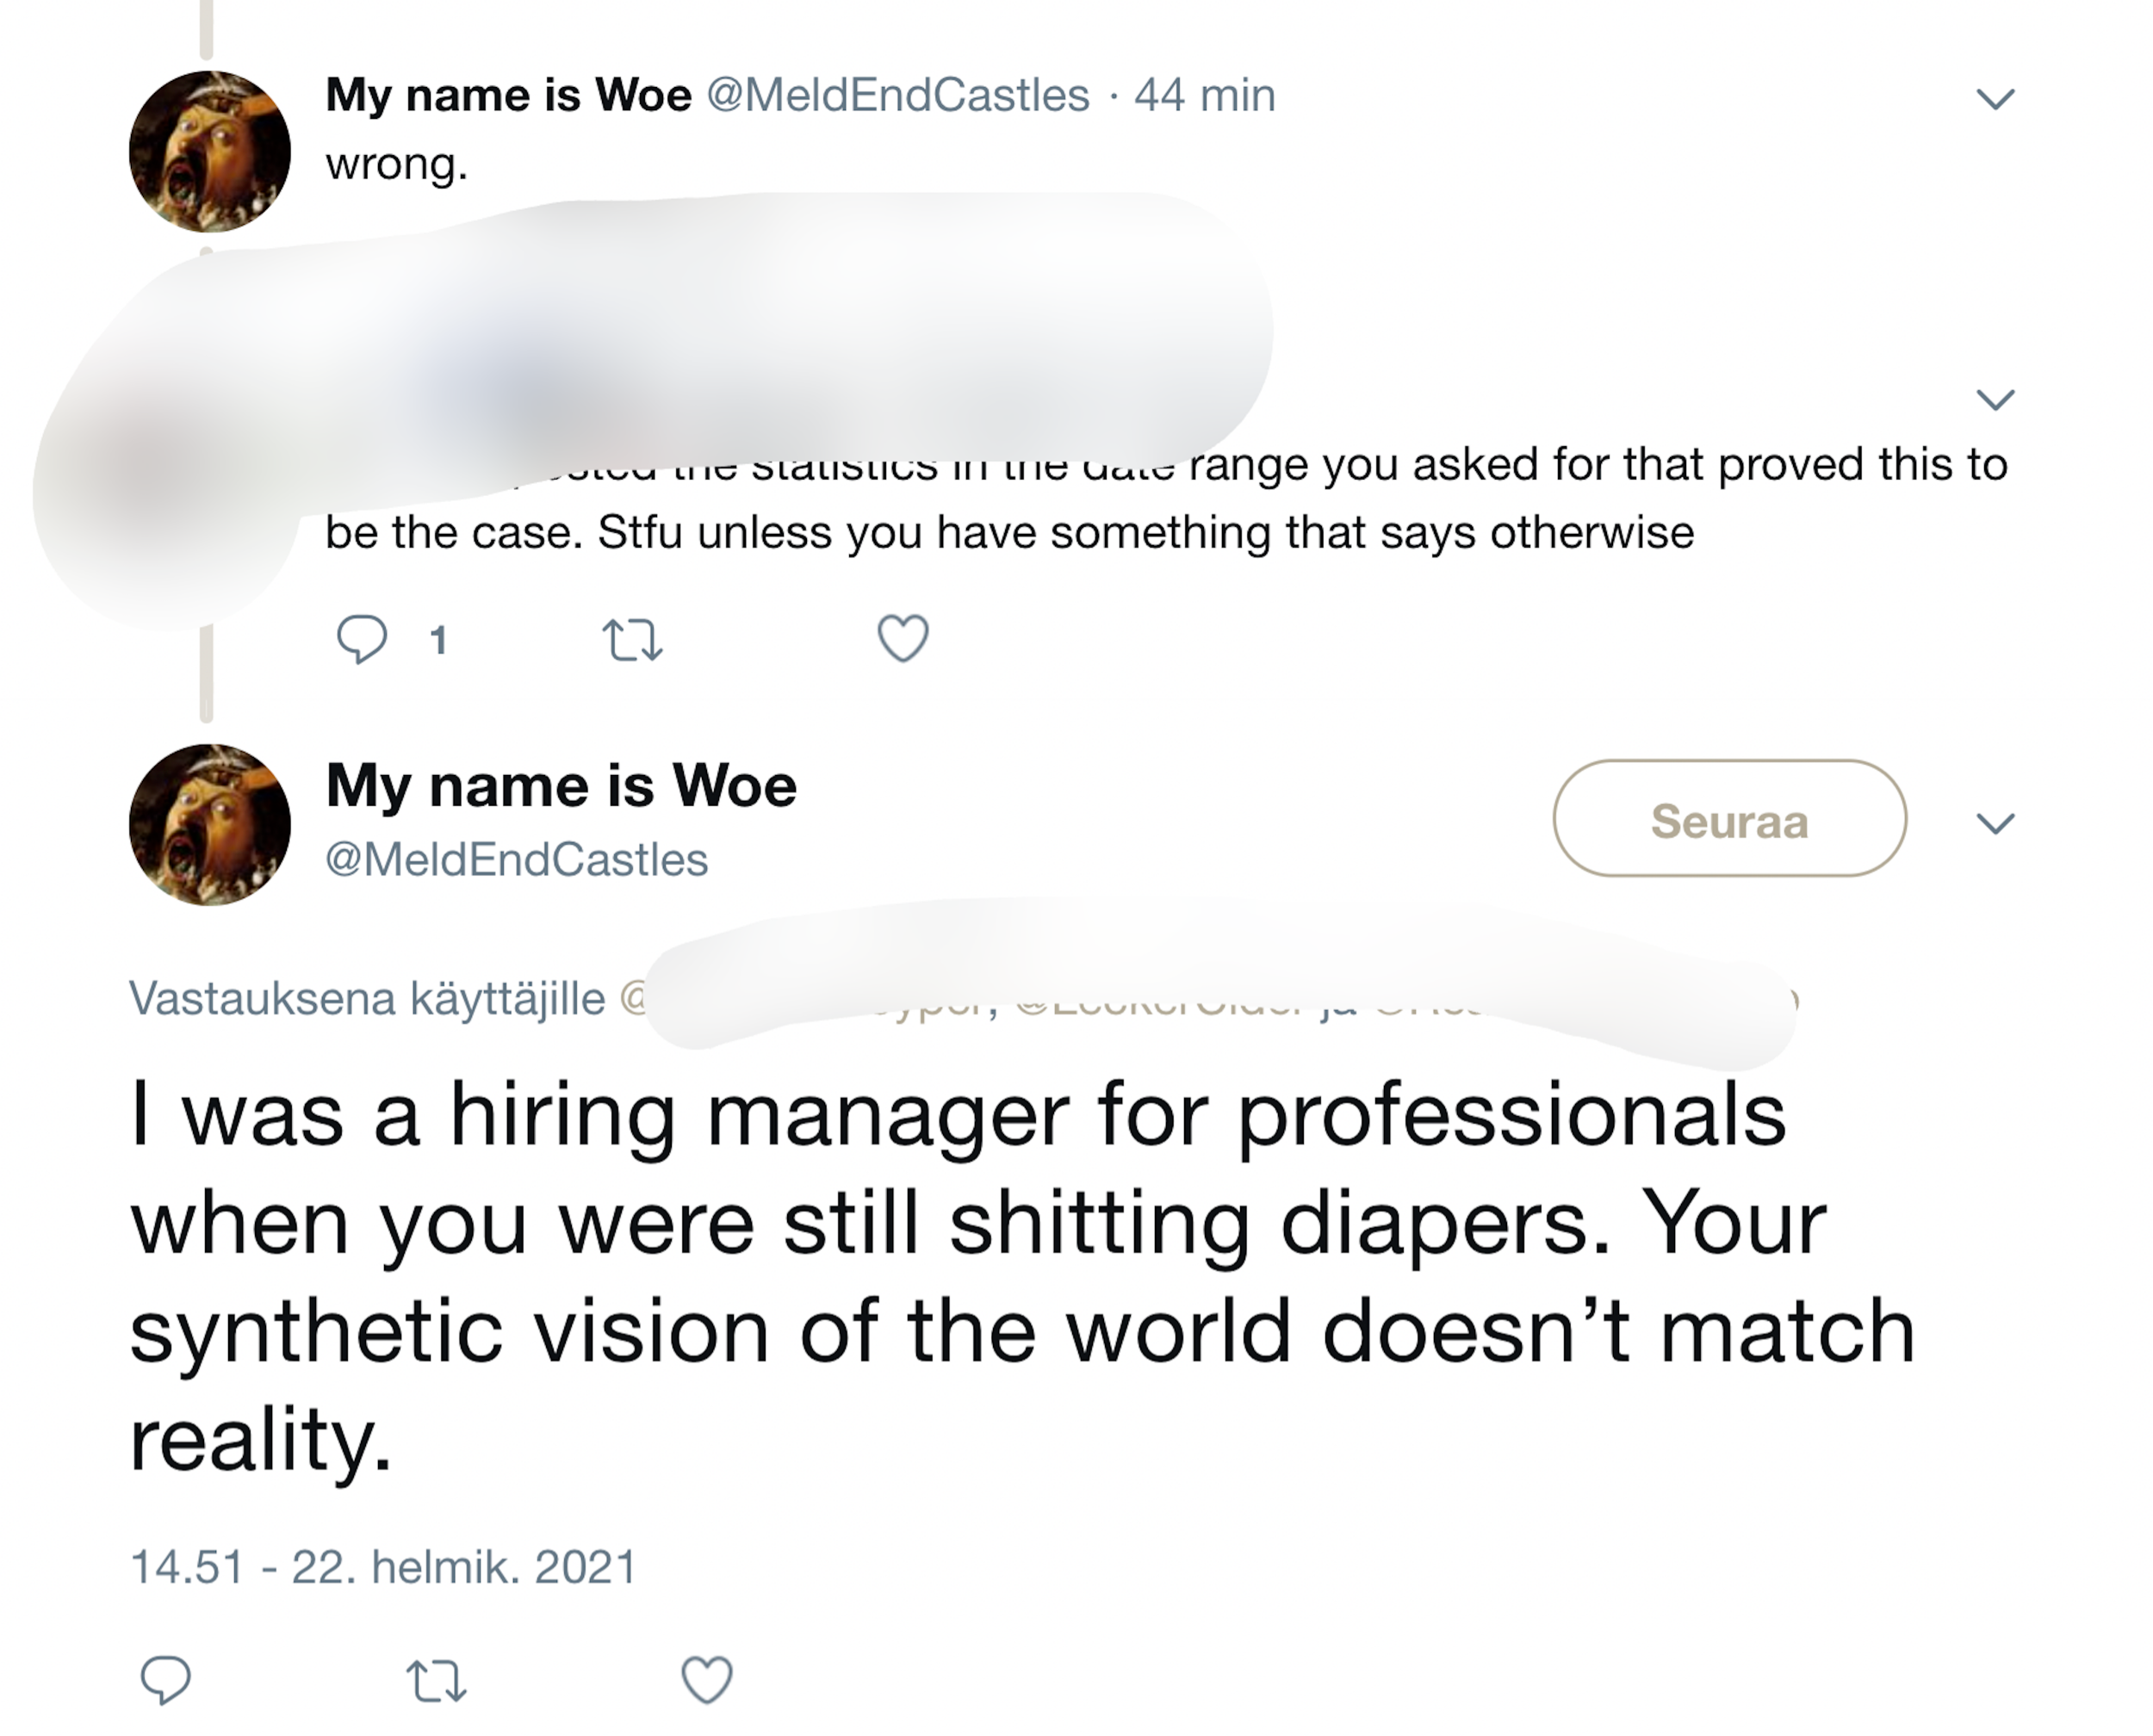 Woe as Meldend saying that he was “a hiring manager for professionals” while the person he’s talking to was “shitting diapers.” OP's tweet reads, "....range you asked for that proved this to be the case. STFU unless you have something that says otherwise."